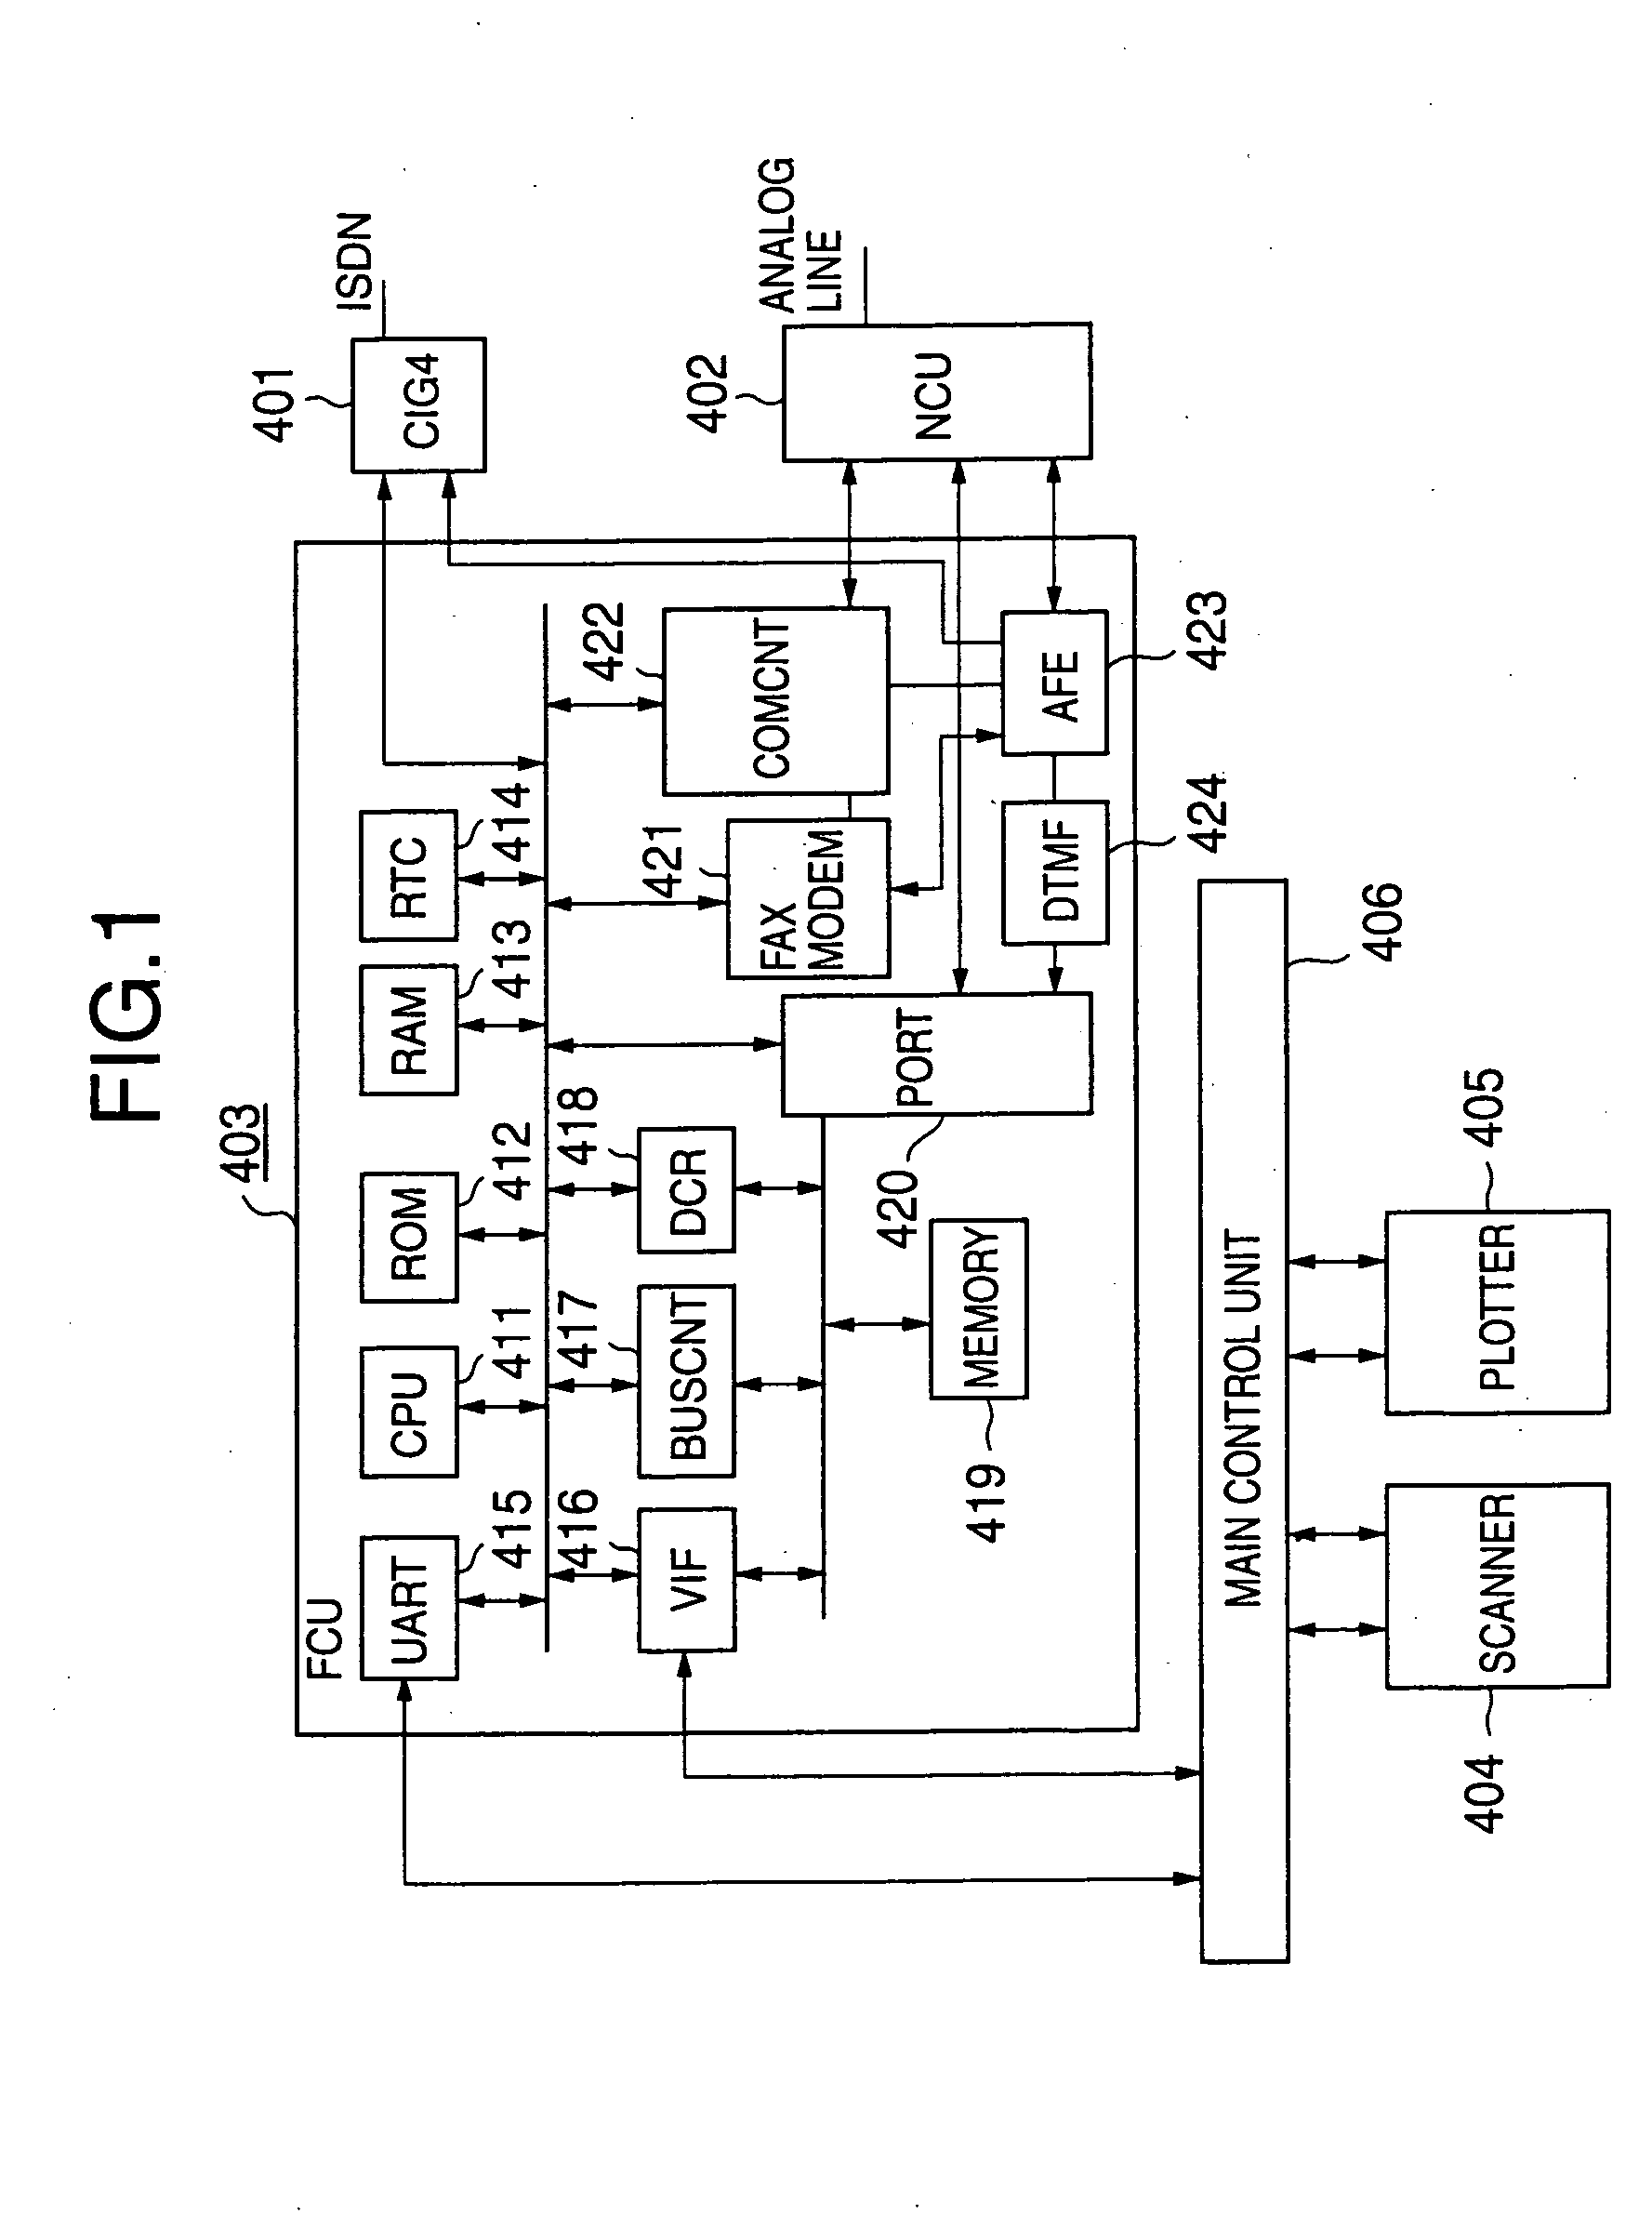 Image-forming-device management system capable of operating in energy-saving mode